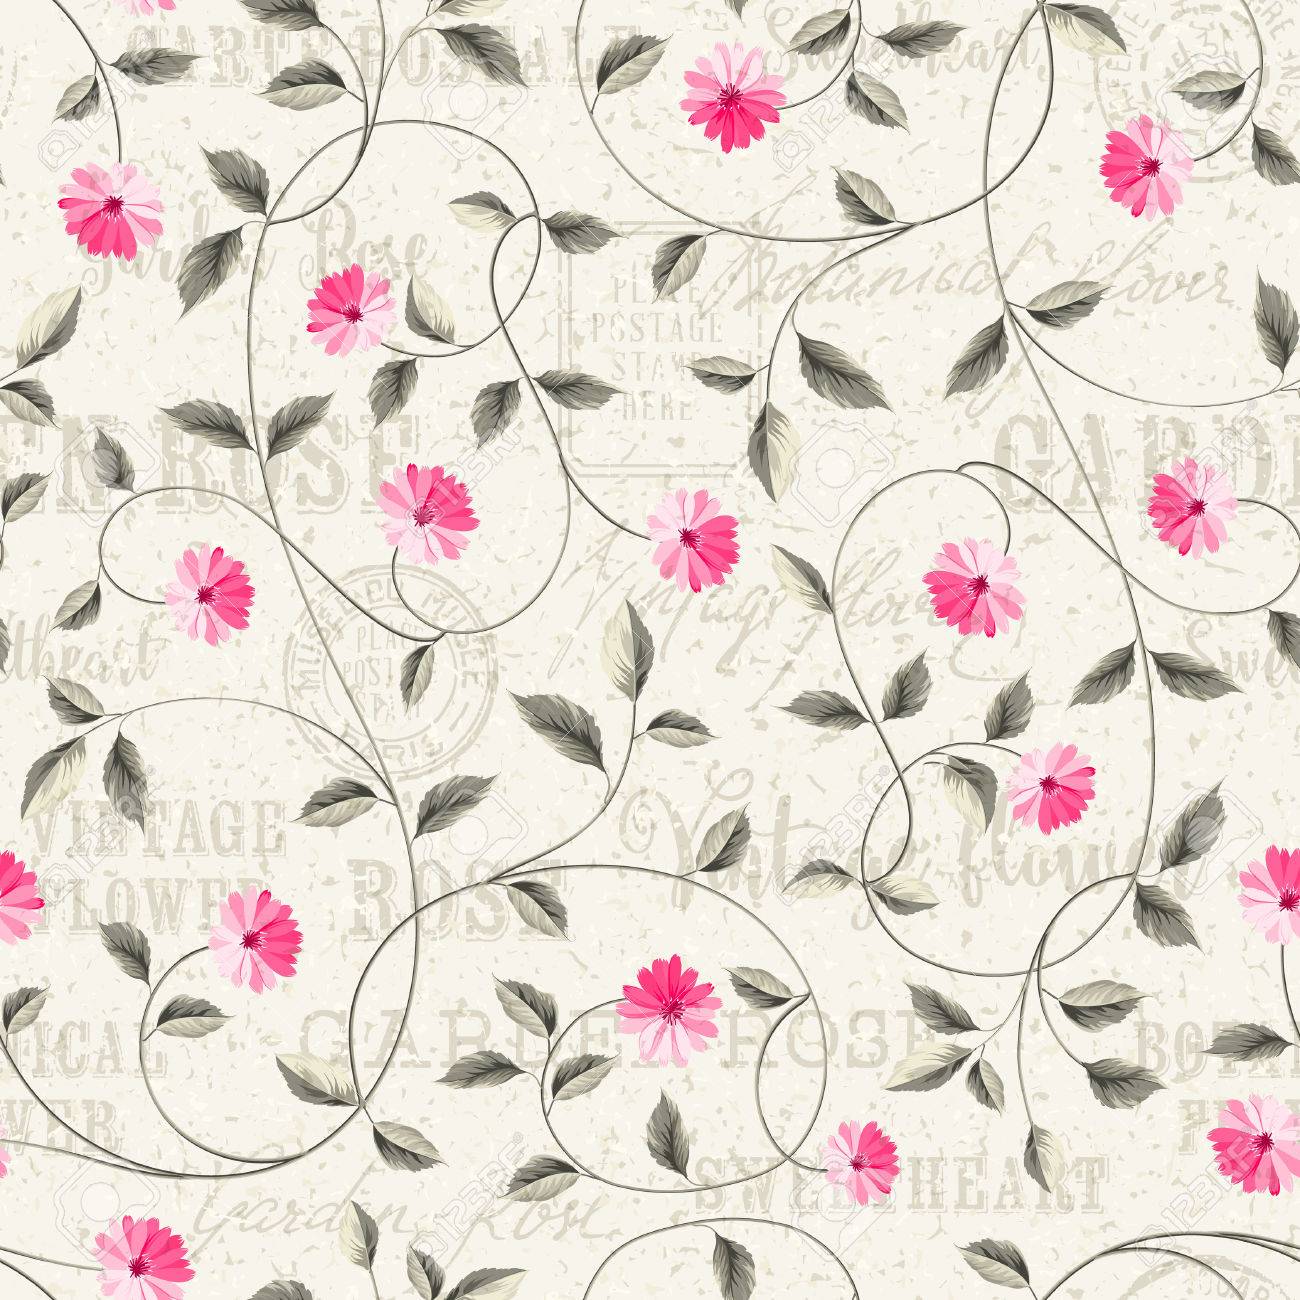 Wallpaper Texture Seamless Floral Background Shabby Chic Style